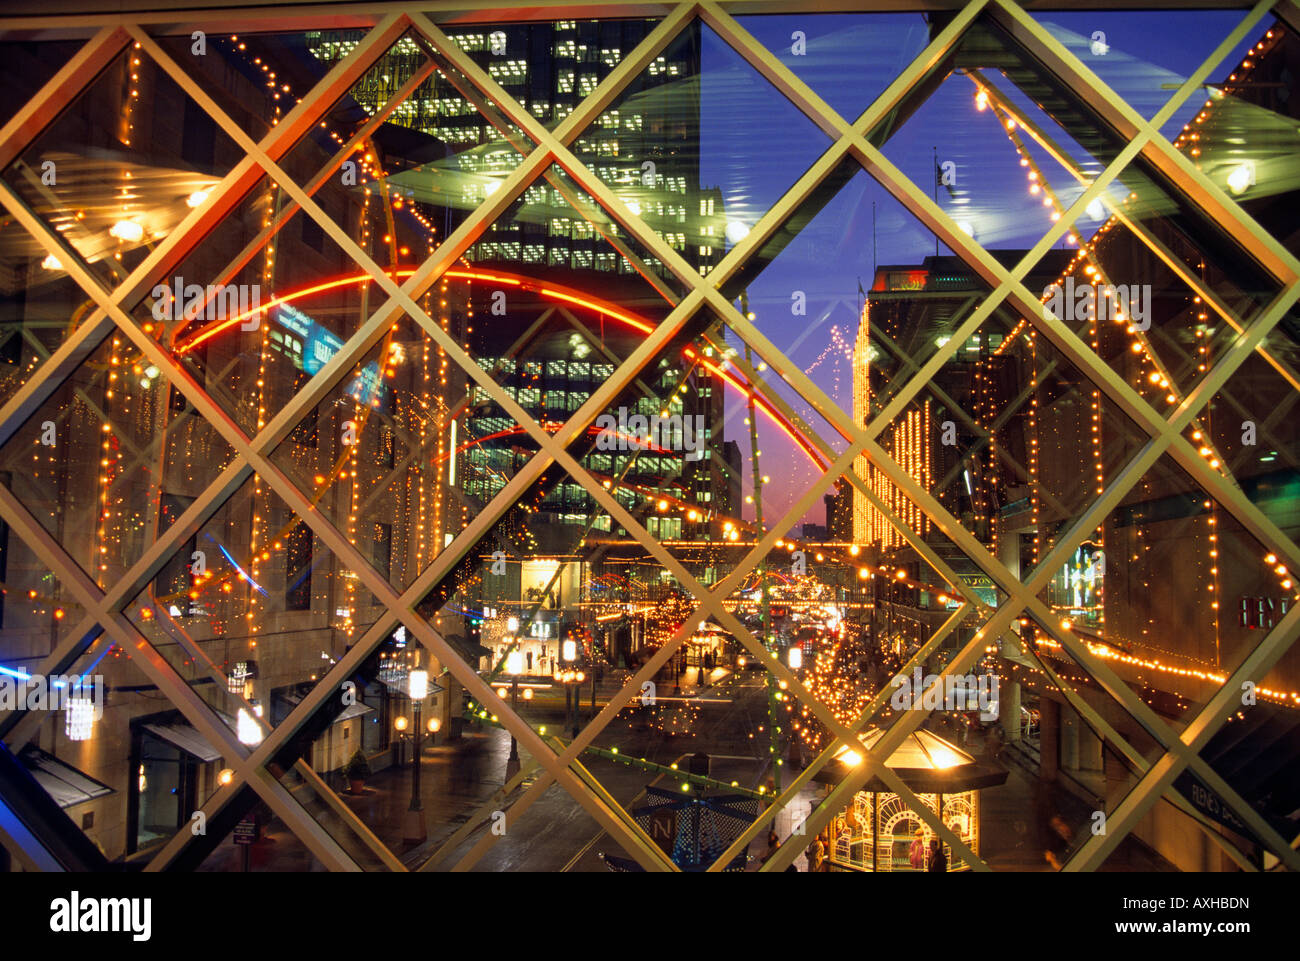 VIEW OF NICOLLET MALL IN DOWNTOWN MINNEAPOLIS, MINNESOTA FROM SKYWAY CONNECTING BUILDINGS.  HOLIDAY SEASON; DECEMBER. Stock Photo